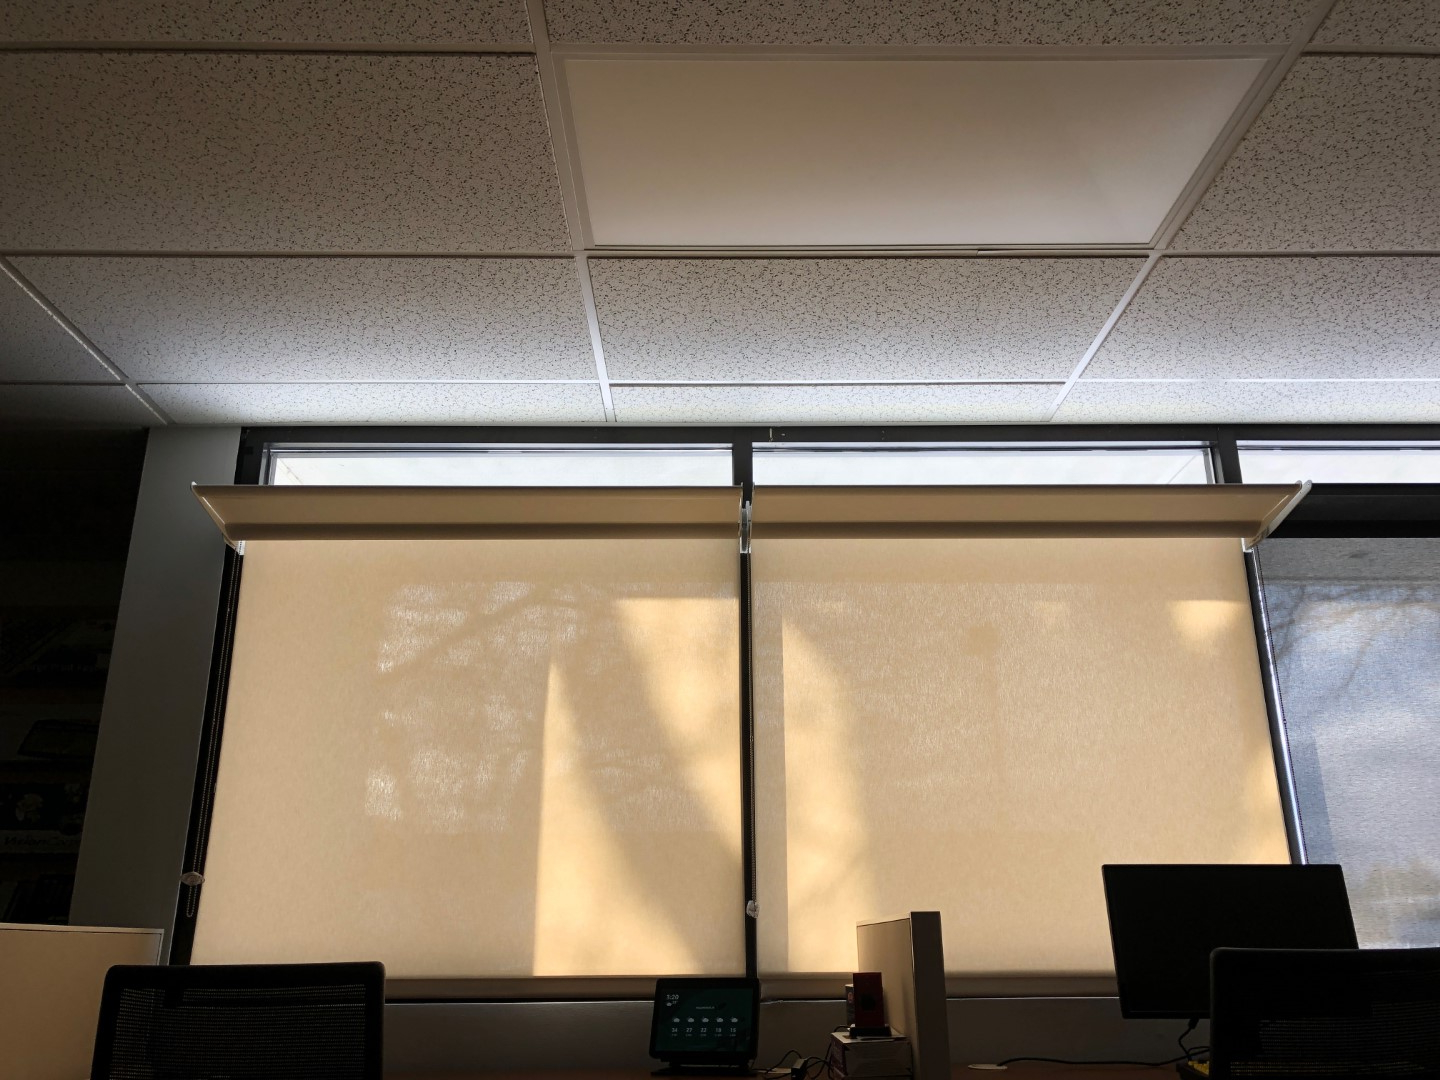 Office window  with shades drawn and lightshelf open. Daylight spreads across the ceiling.